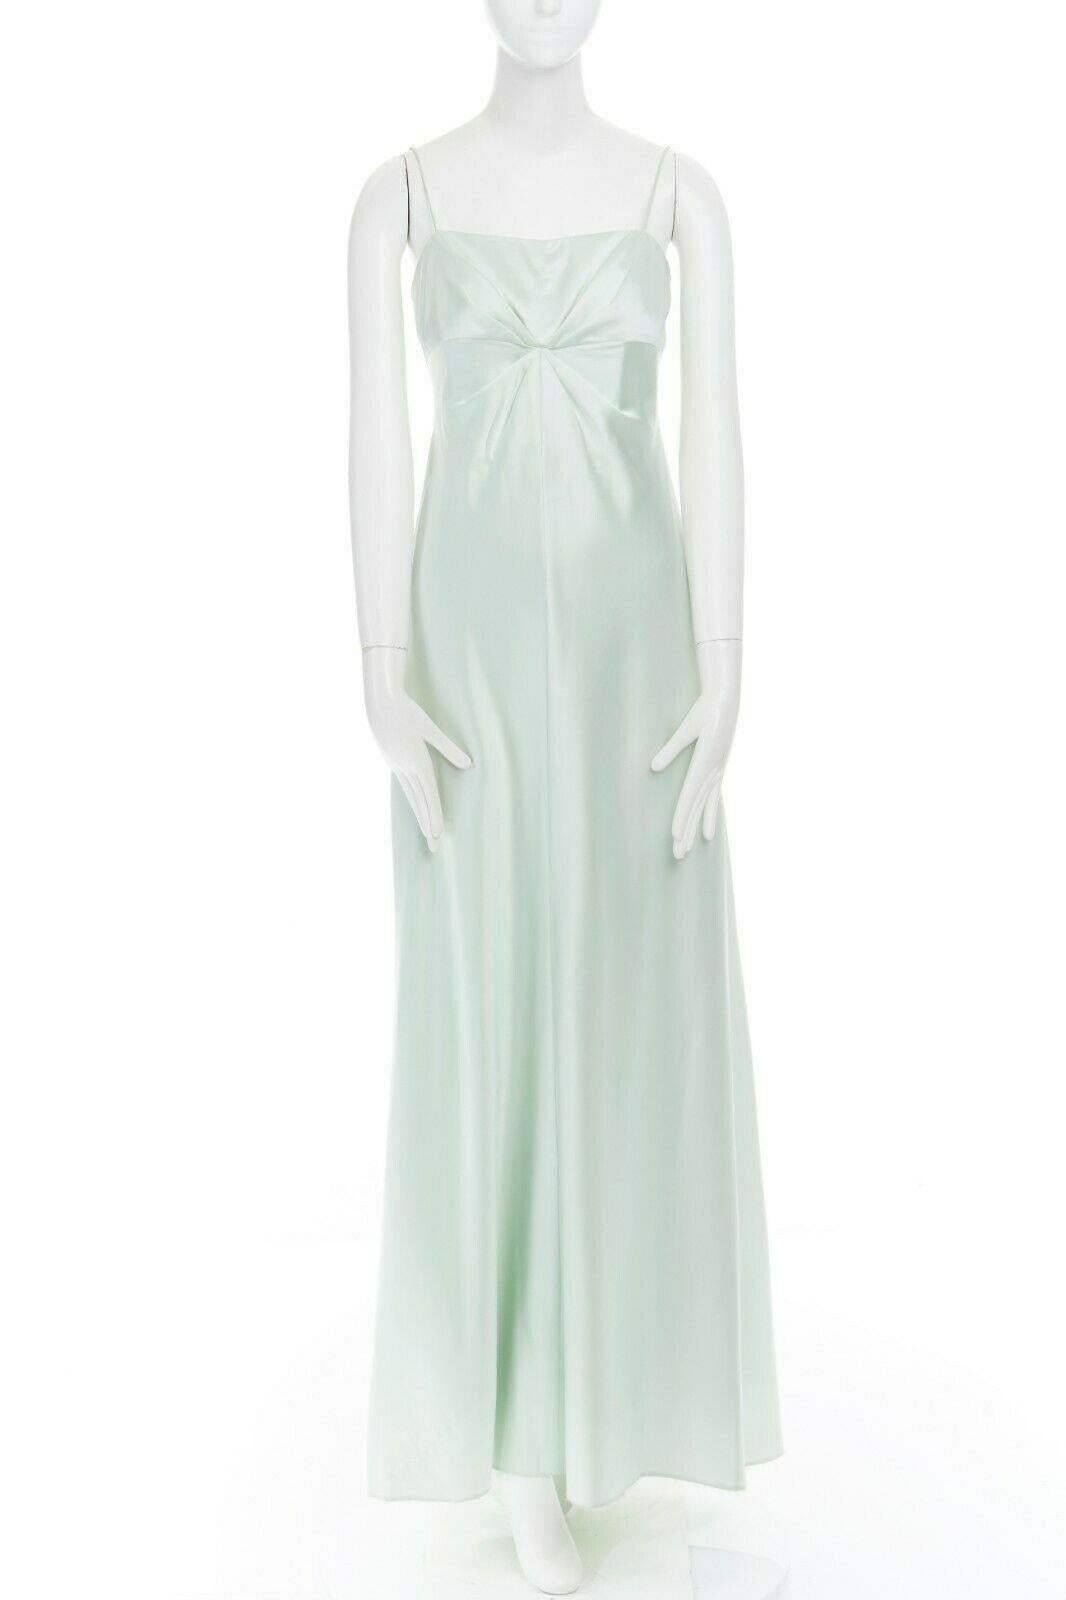 LAUNDRY SHELLI SEGAL pastel green gathered dart bust evening gown US8 M 
Reference: LACG/A00373 
Brand: Laundry 
Designer: Shelli Segal 
Color: Green 
Pattern: Solid 
Closure: Zip 
Extra Detail: Feels like acetate. Spaghetti strap. Pleated dark